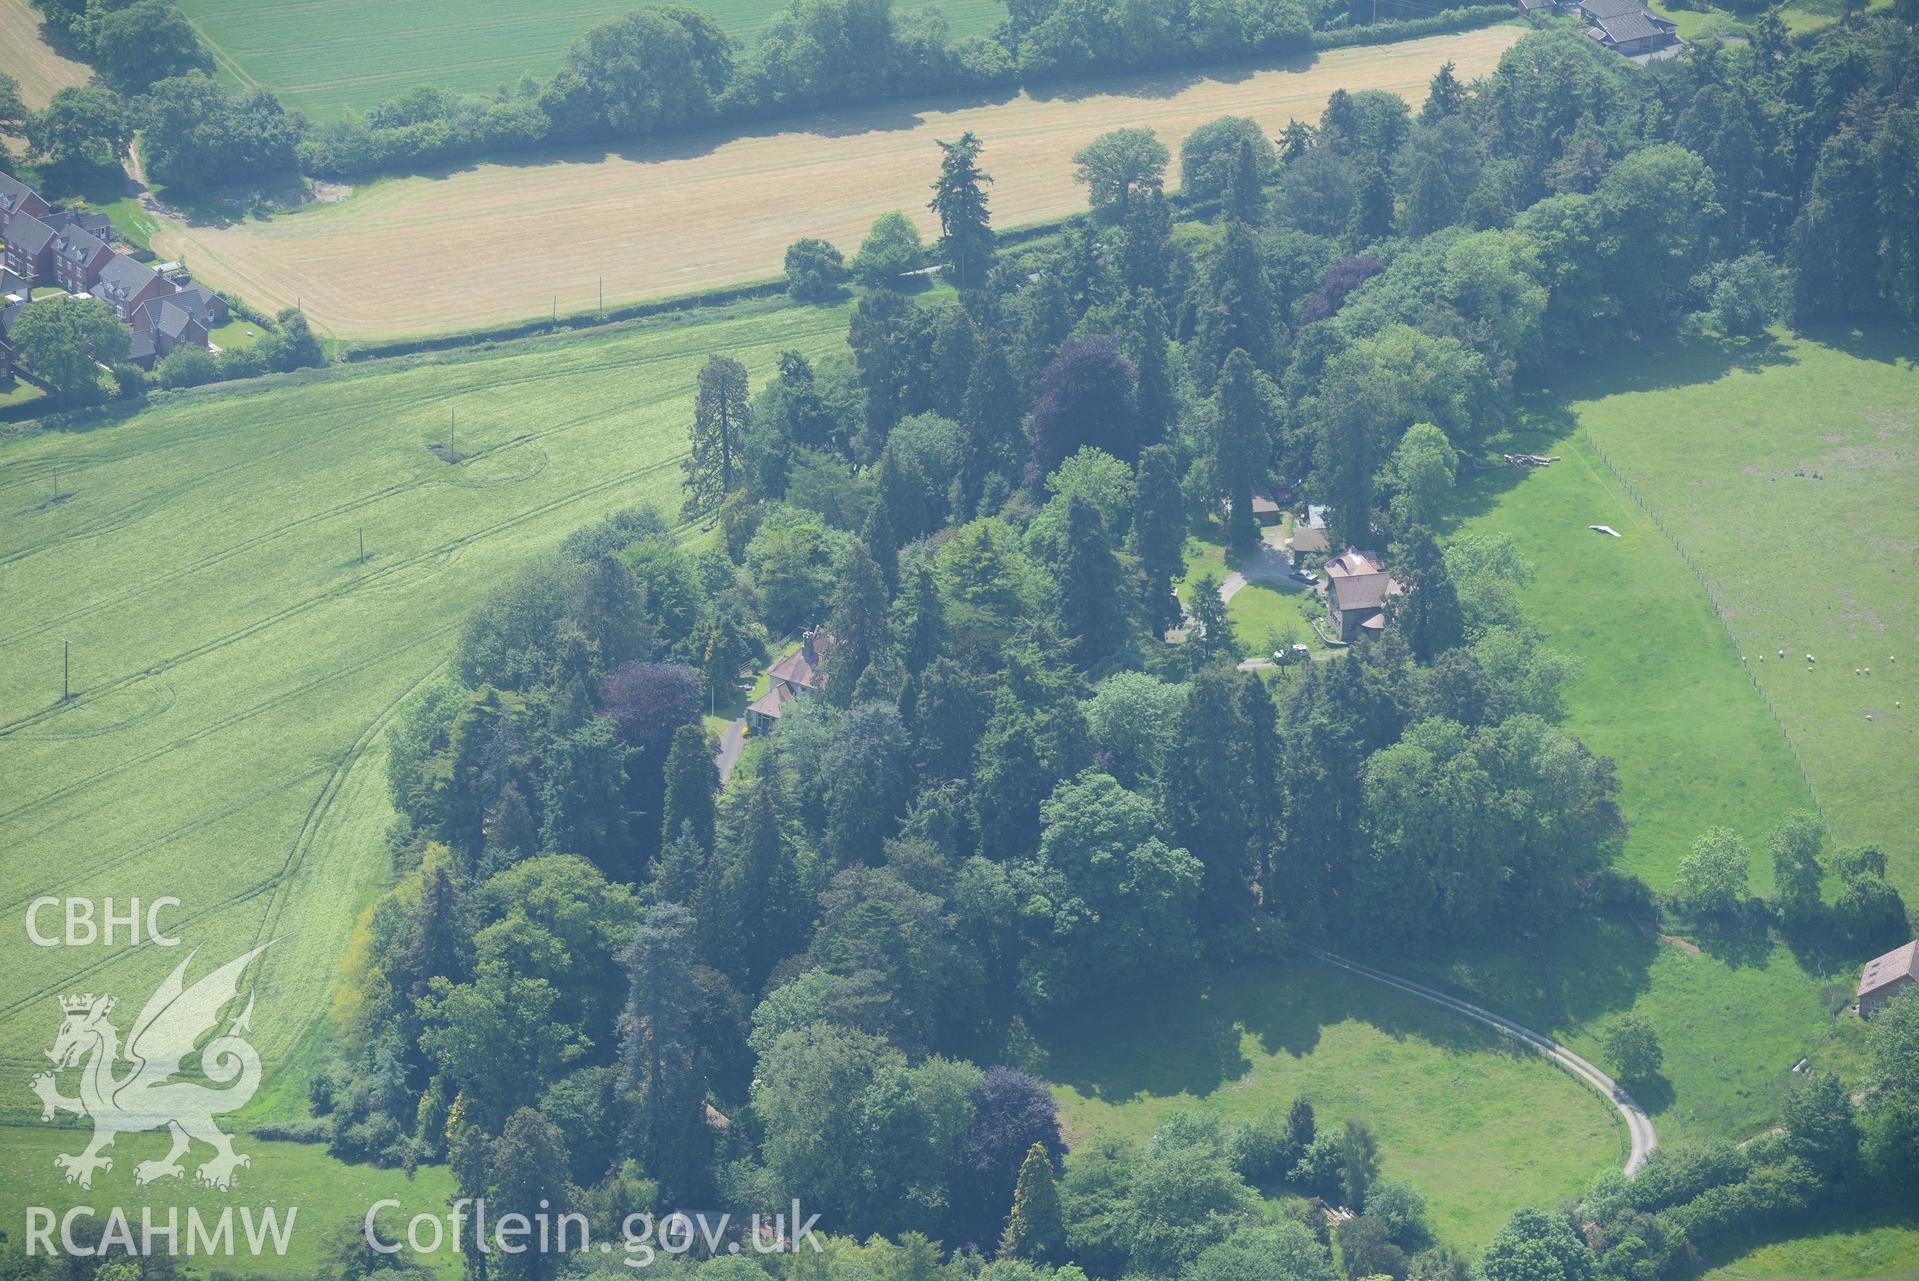 Prestigne town and Sila House (in the trees). Oblique aerial photograph taken during the Royal Commission's programme of archaeological aerial reconnaissance by Toby Driver on 11th June 2015.